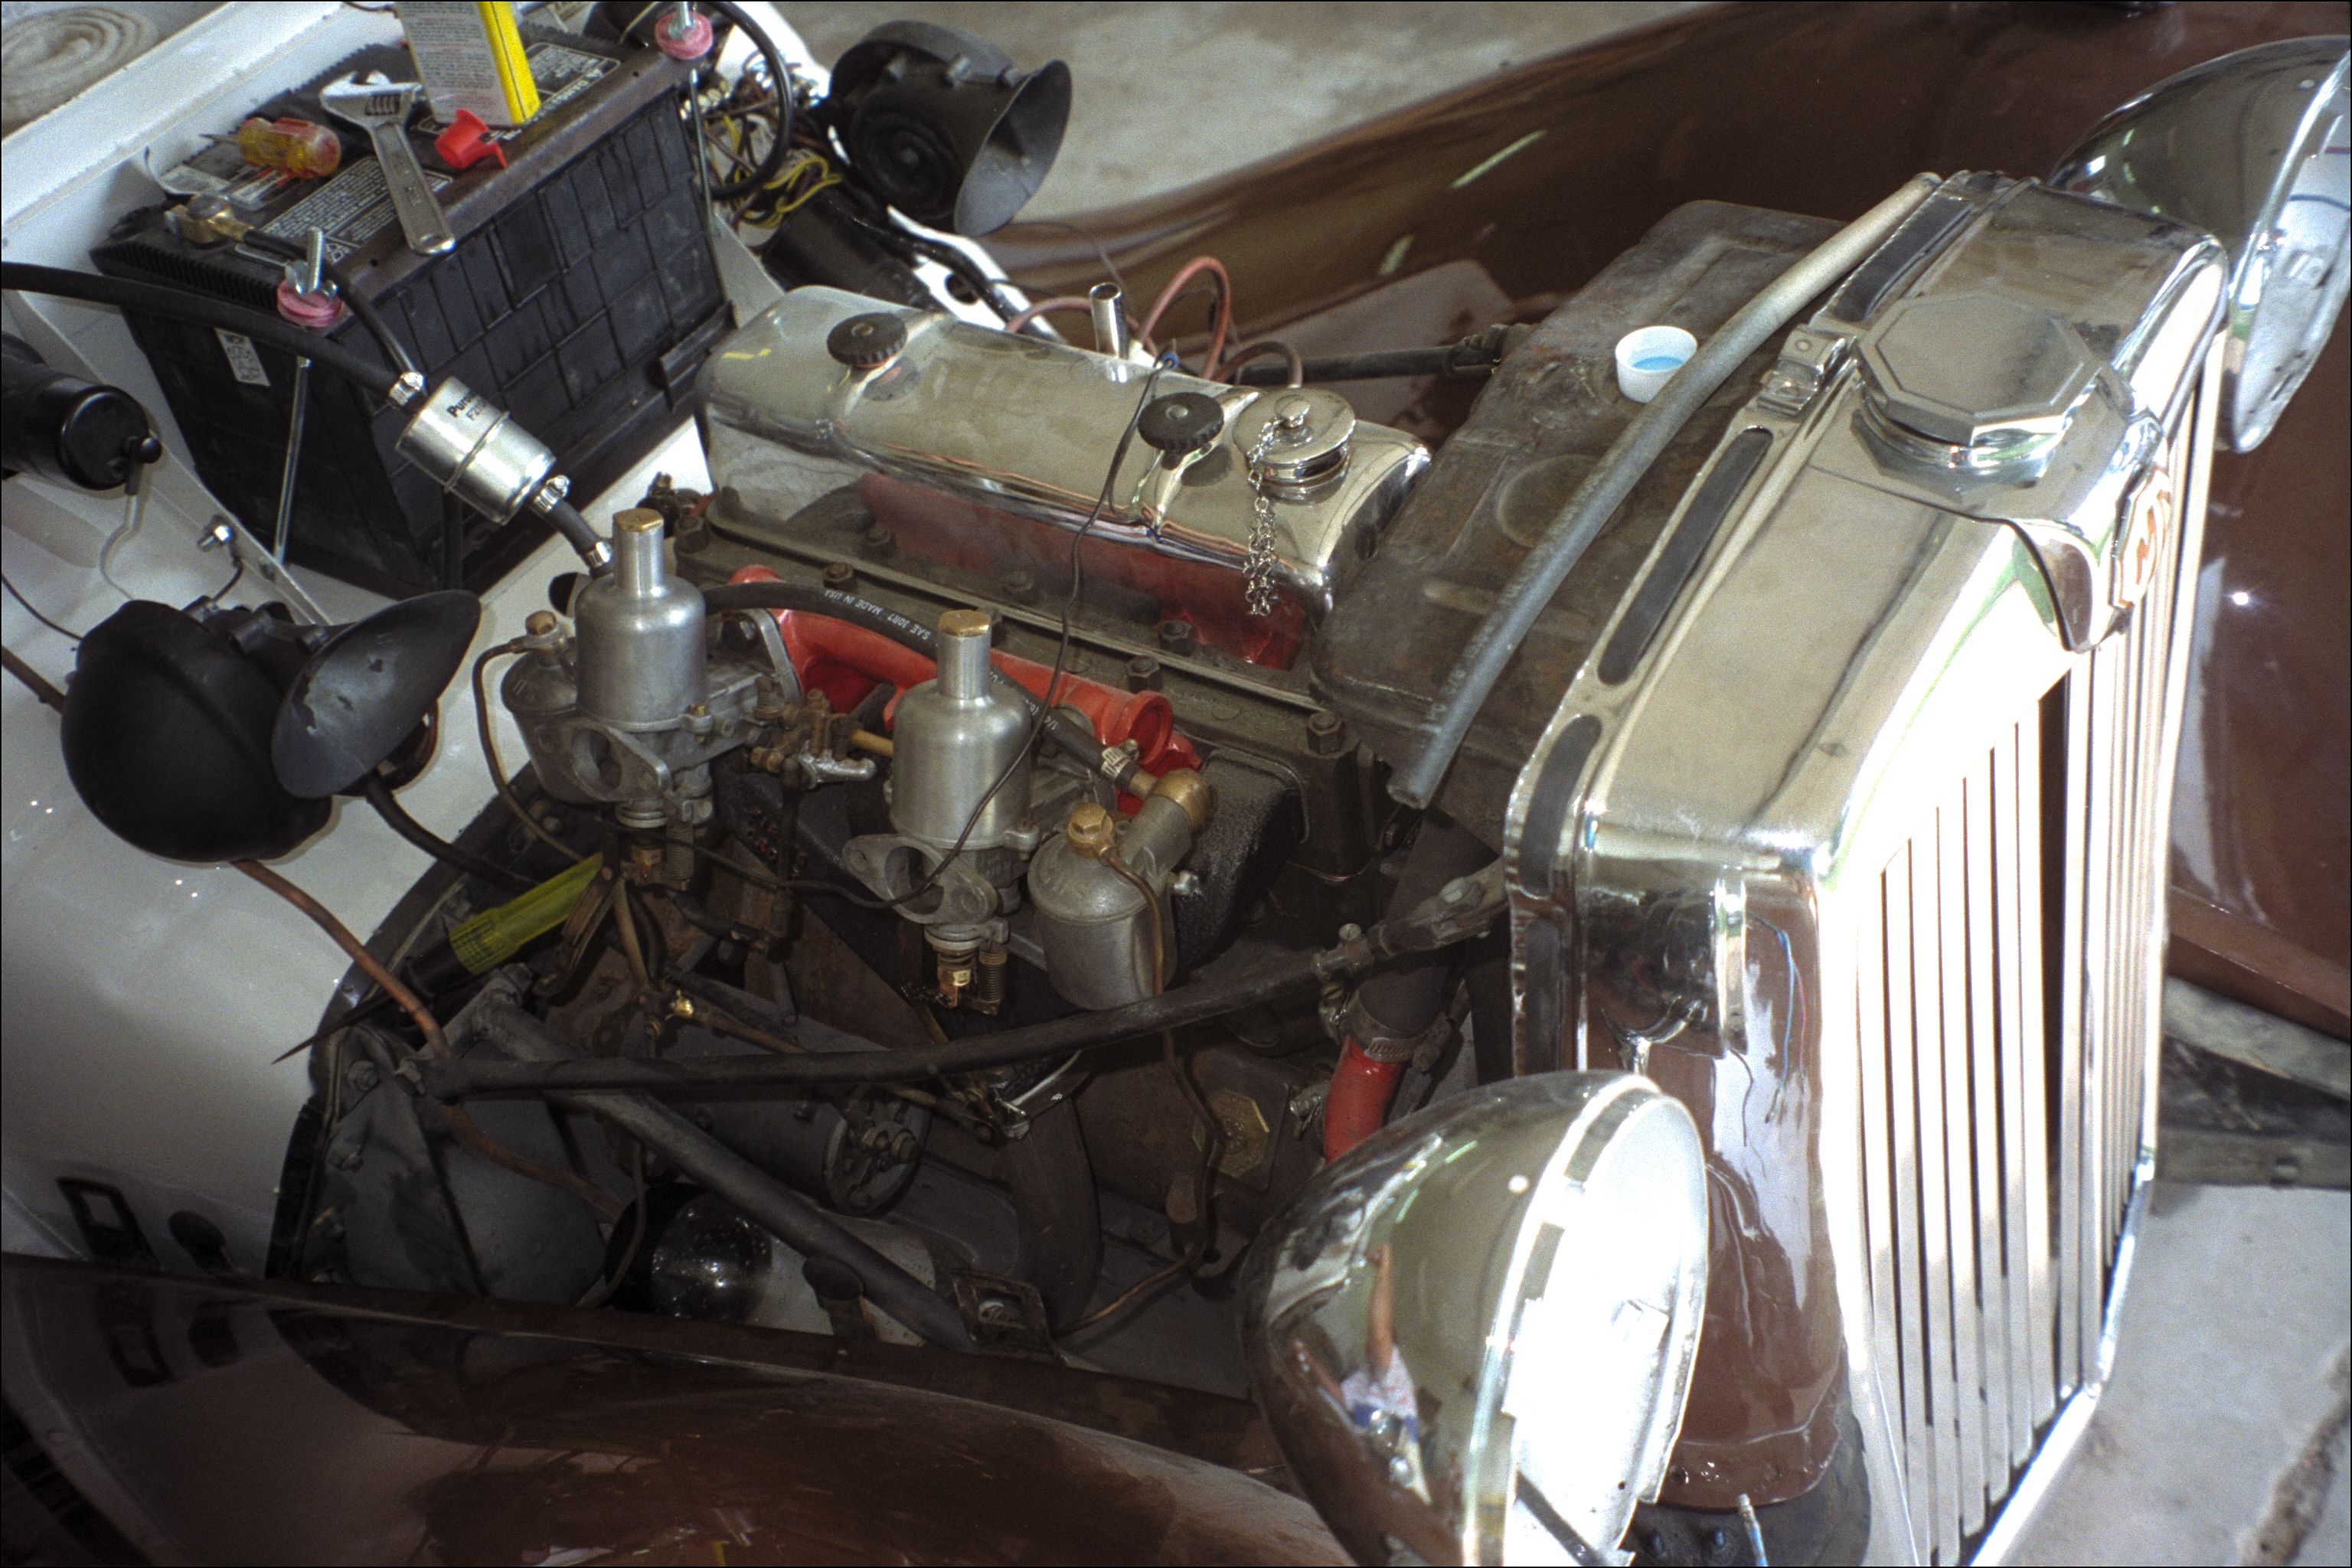 Engine ready, with new battery installed